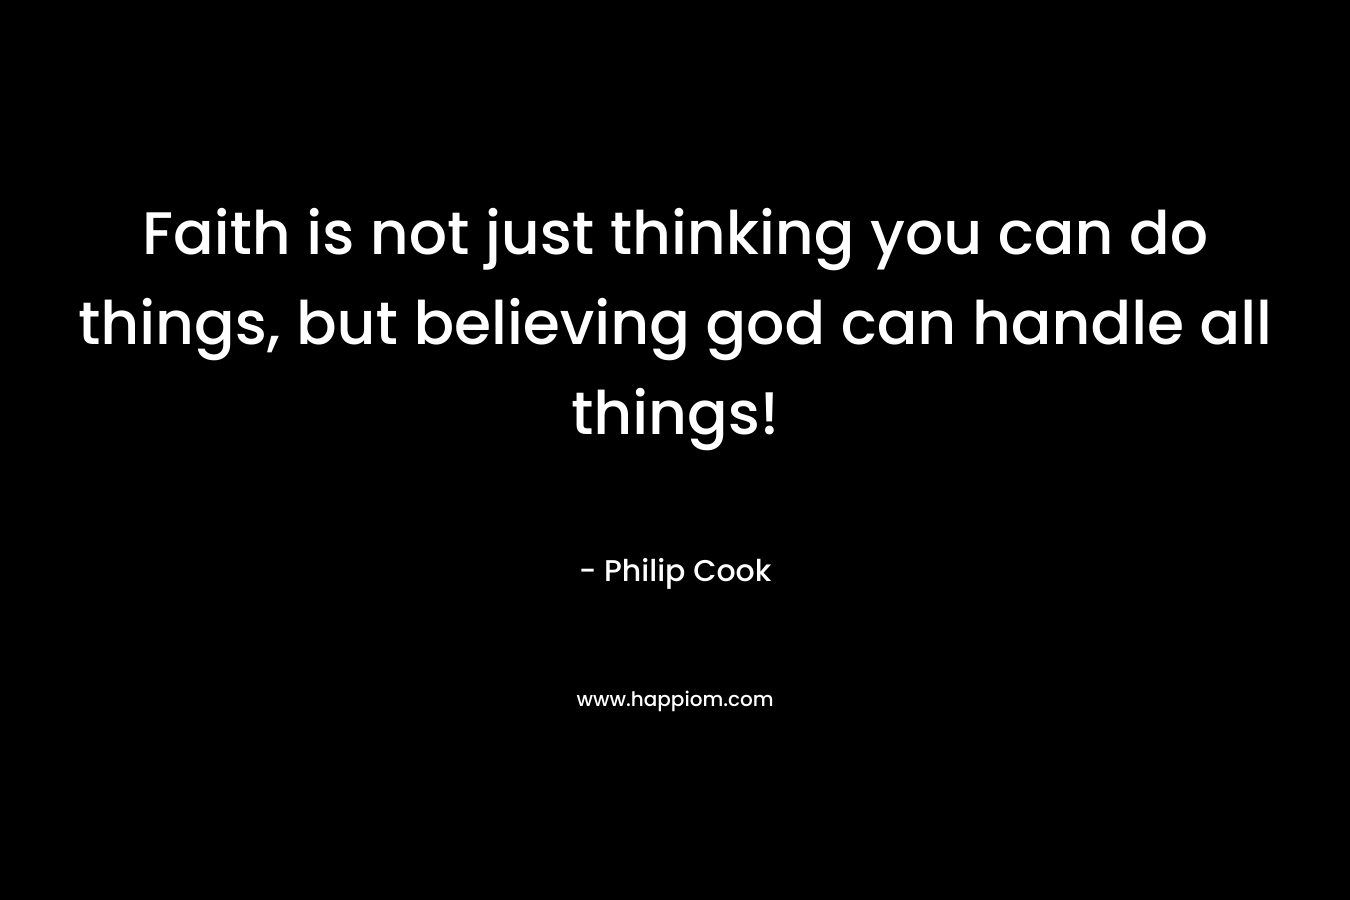 Faith is not just thinking you can do things, but believing god can handle all things! – Philip Cook